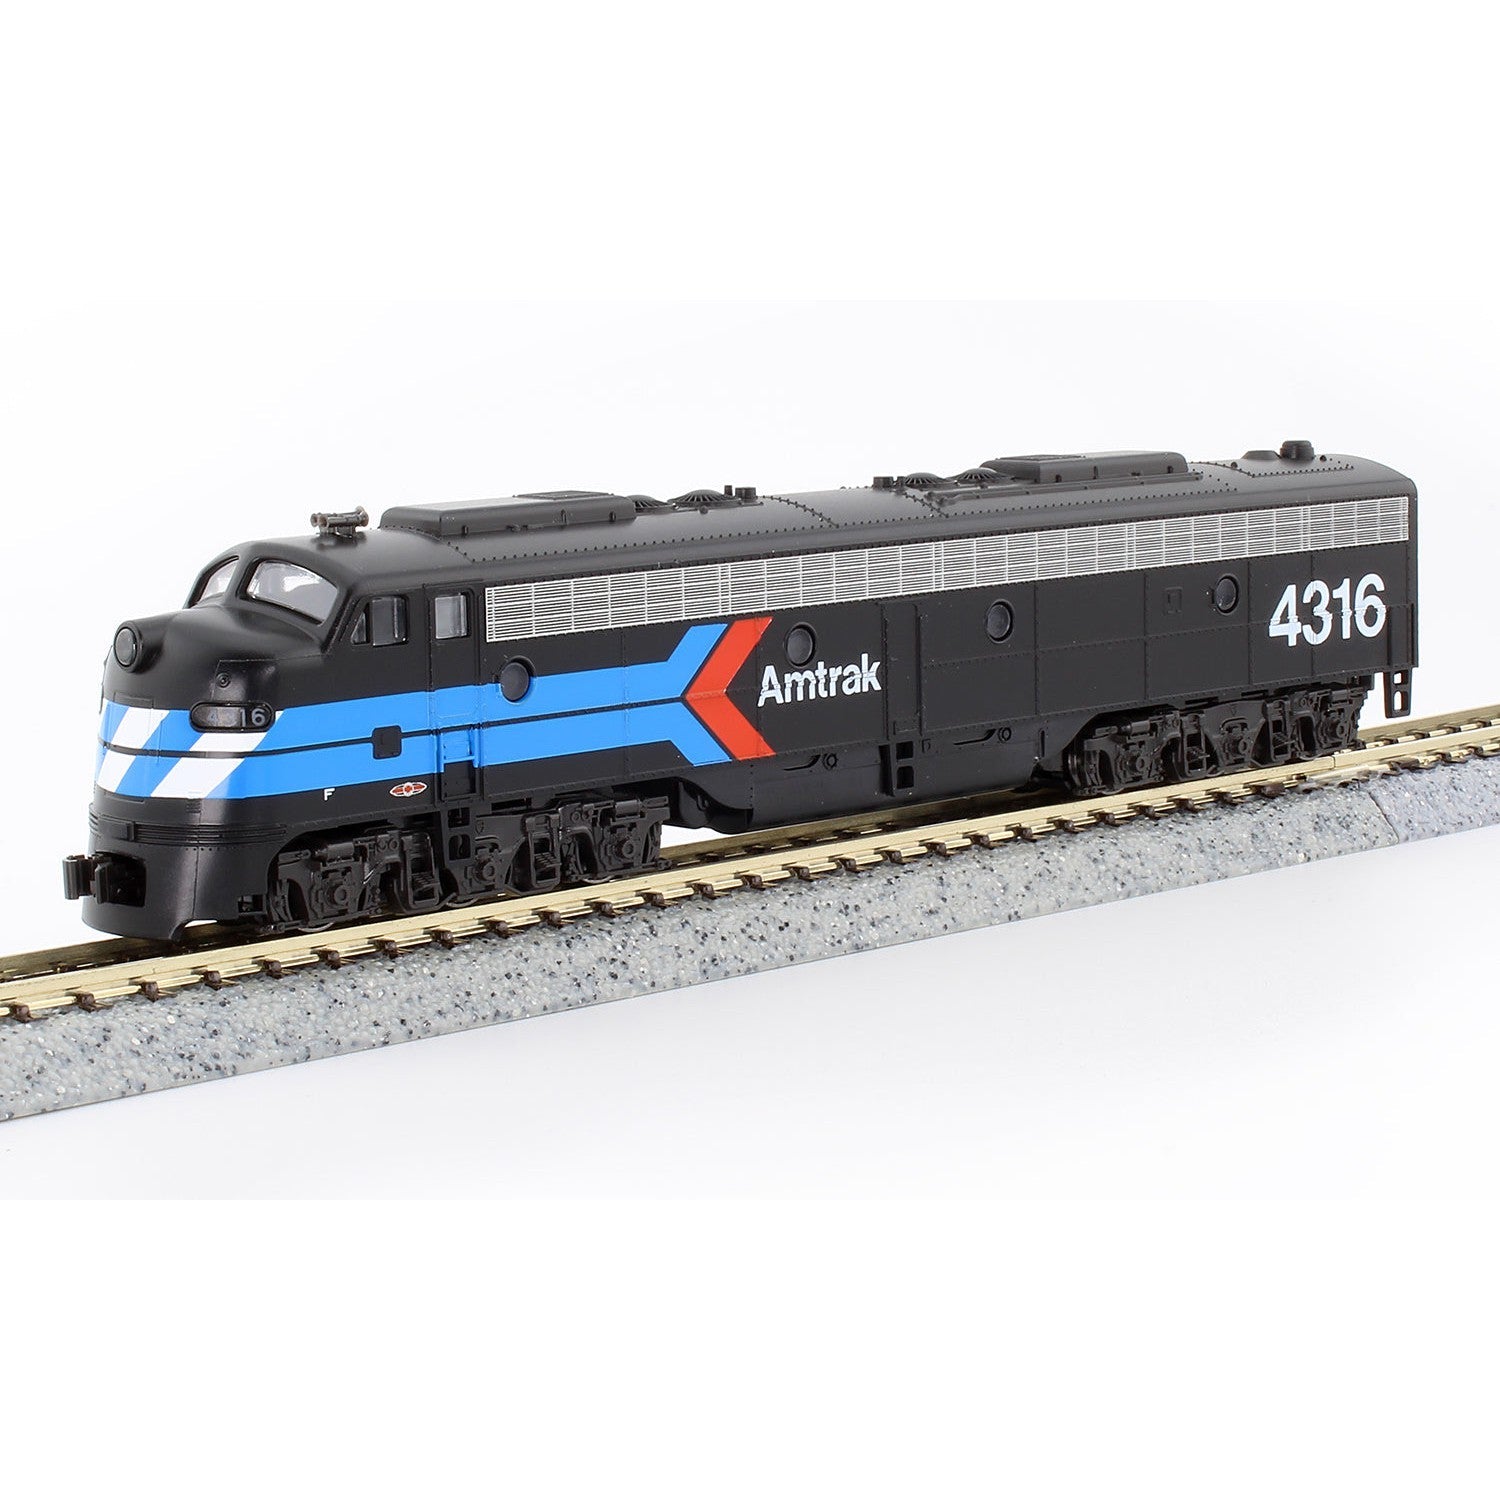 Fusion Scale Hobbies: Kato N Scale Model Trains - Freight - Passenger